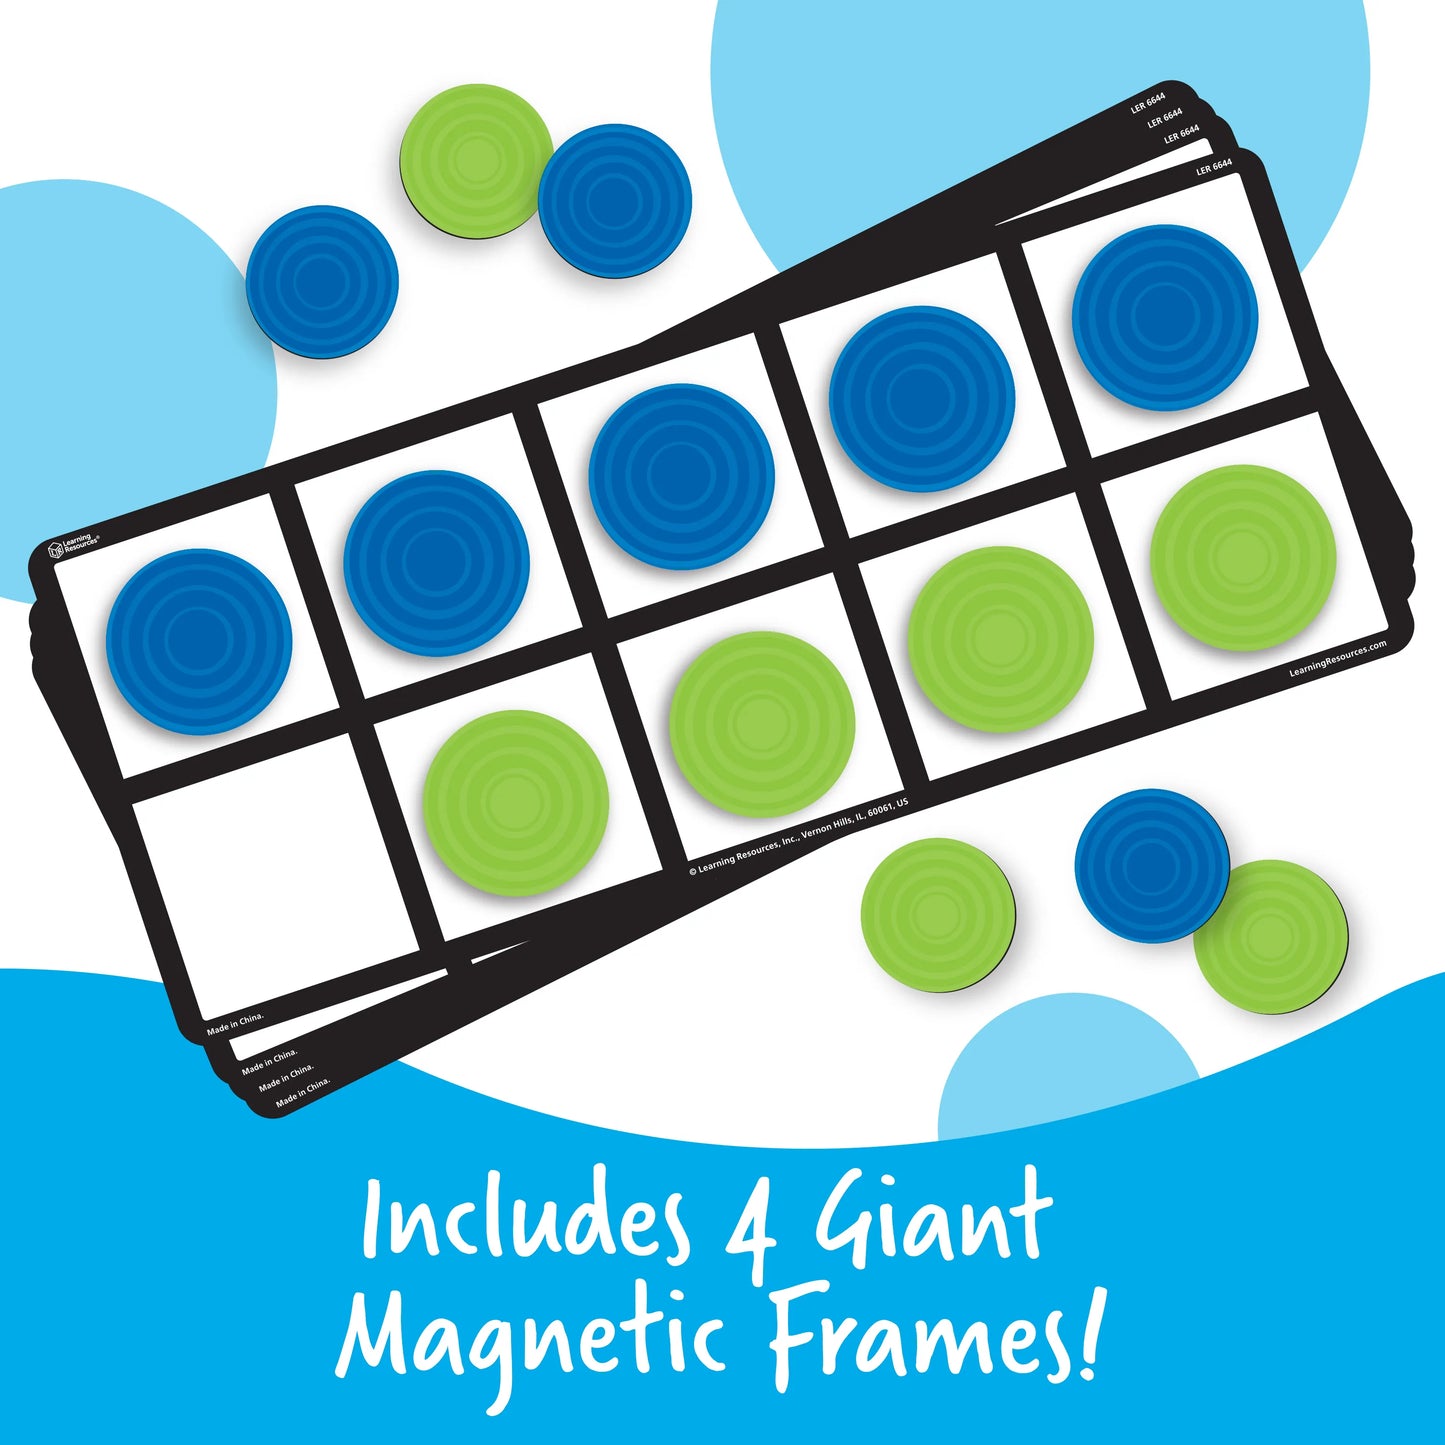 Learning Resources Giant Magnetic Ten-Frame Set